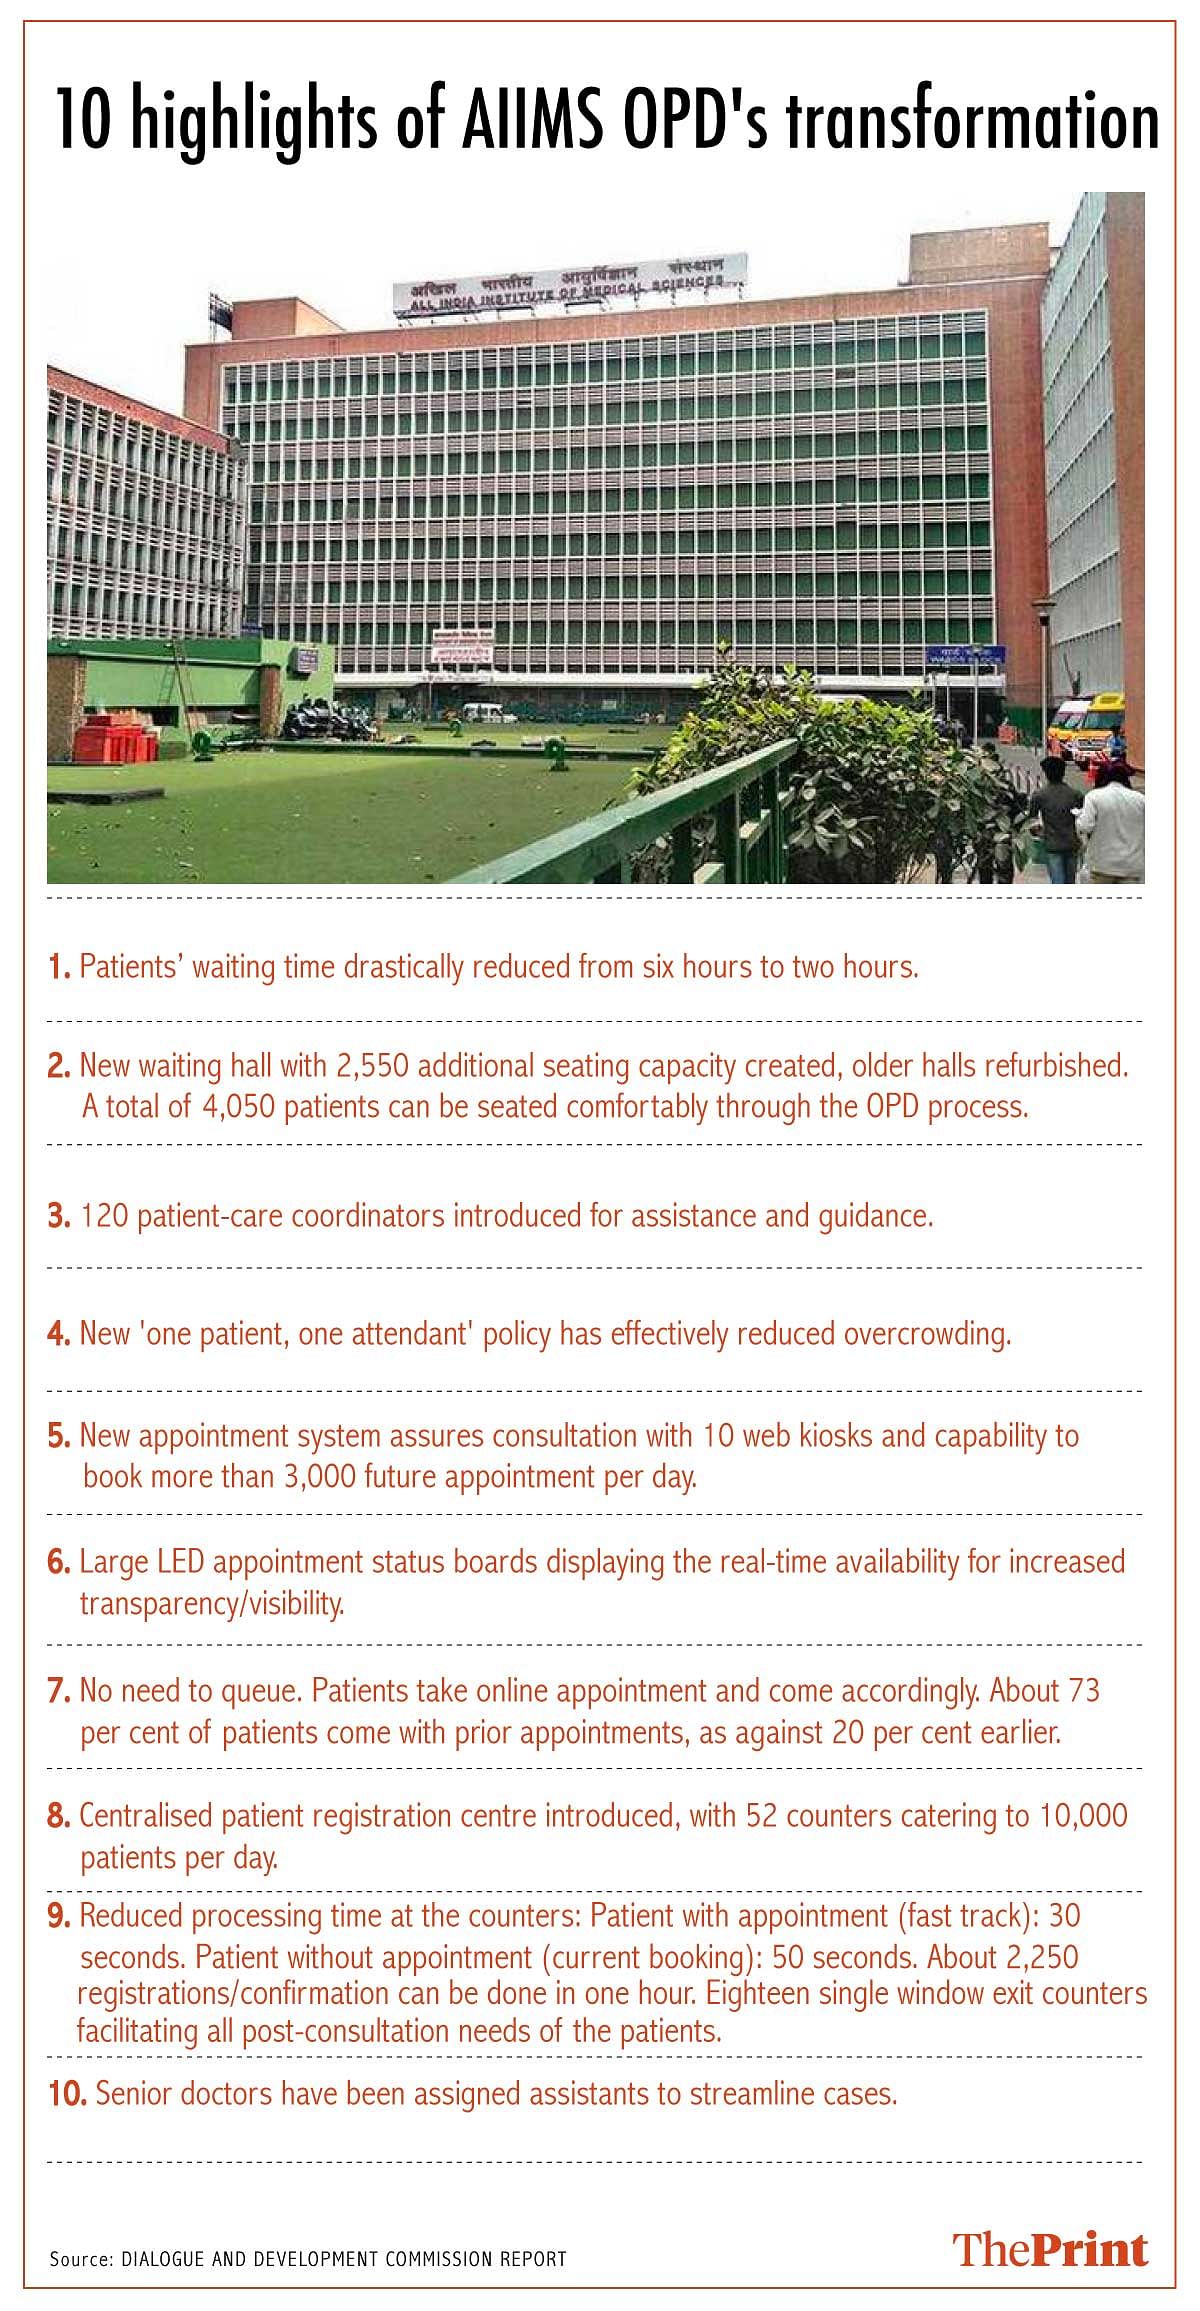 AIIMS' OPD transformation